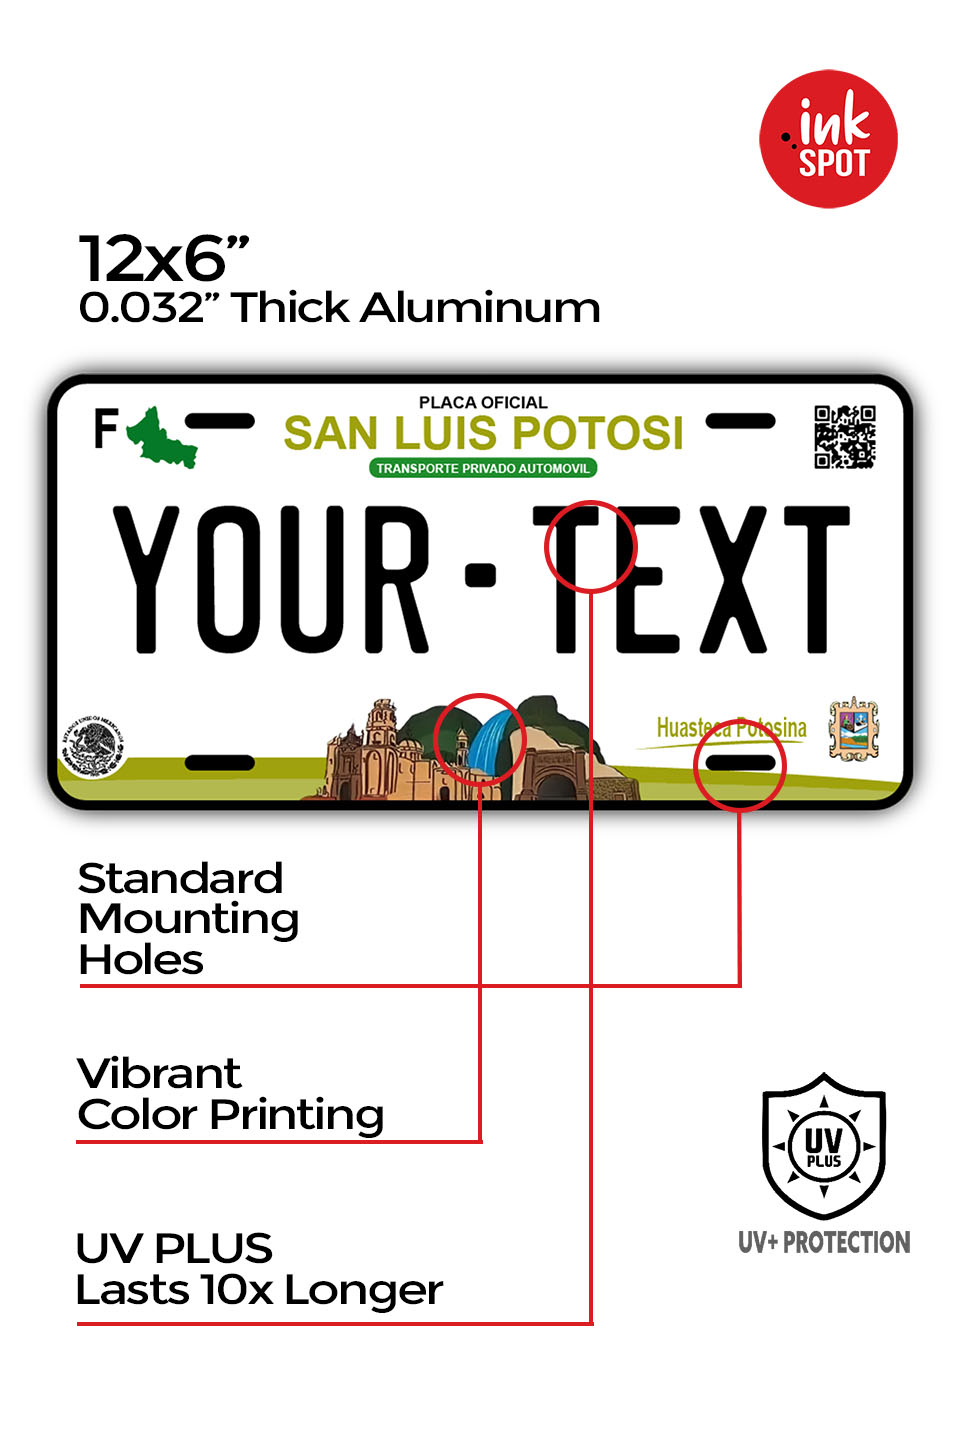 Mexico custom license plate - Customize all 32 States - Laserx Engraving